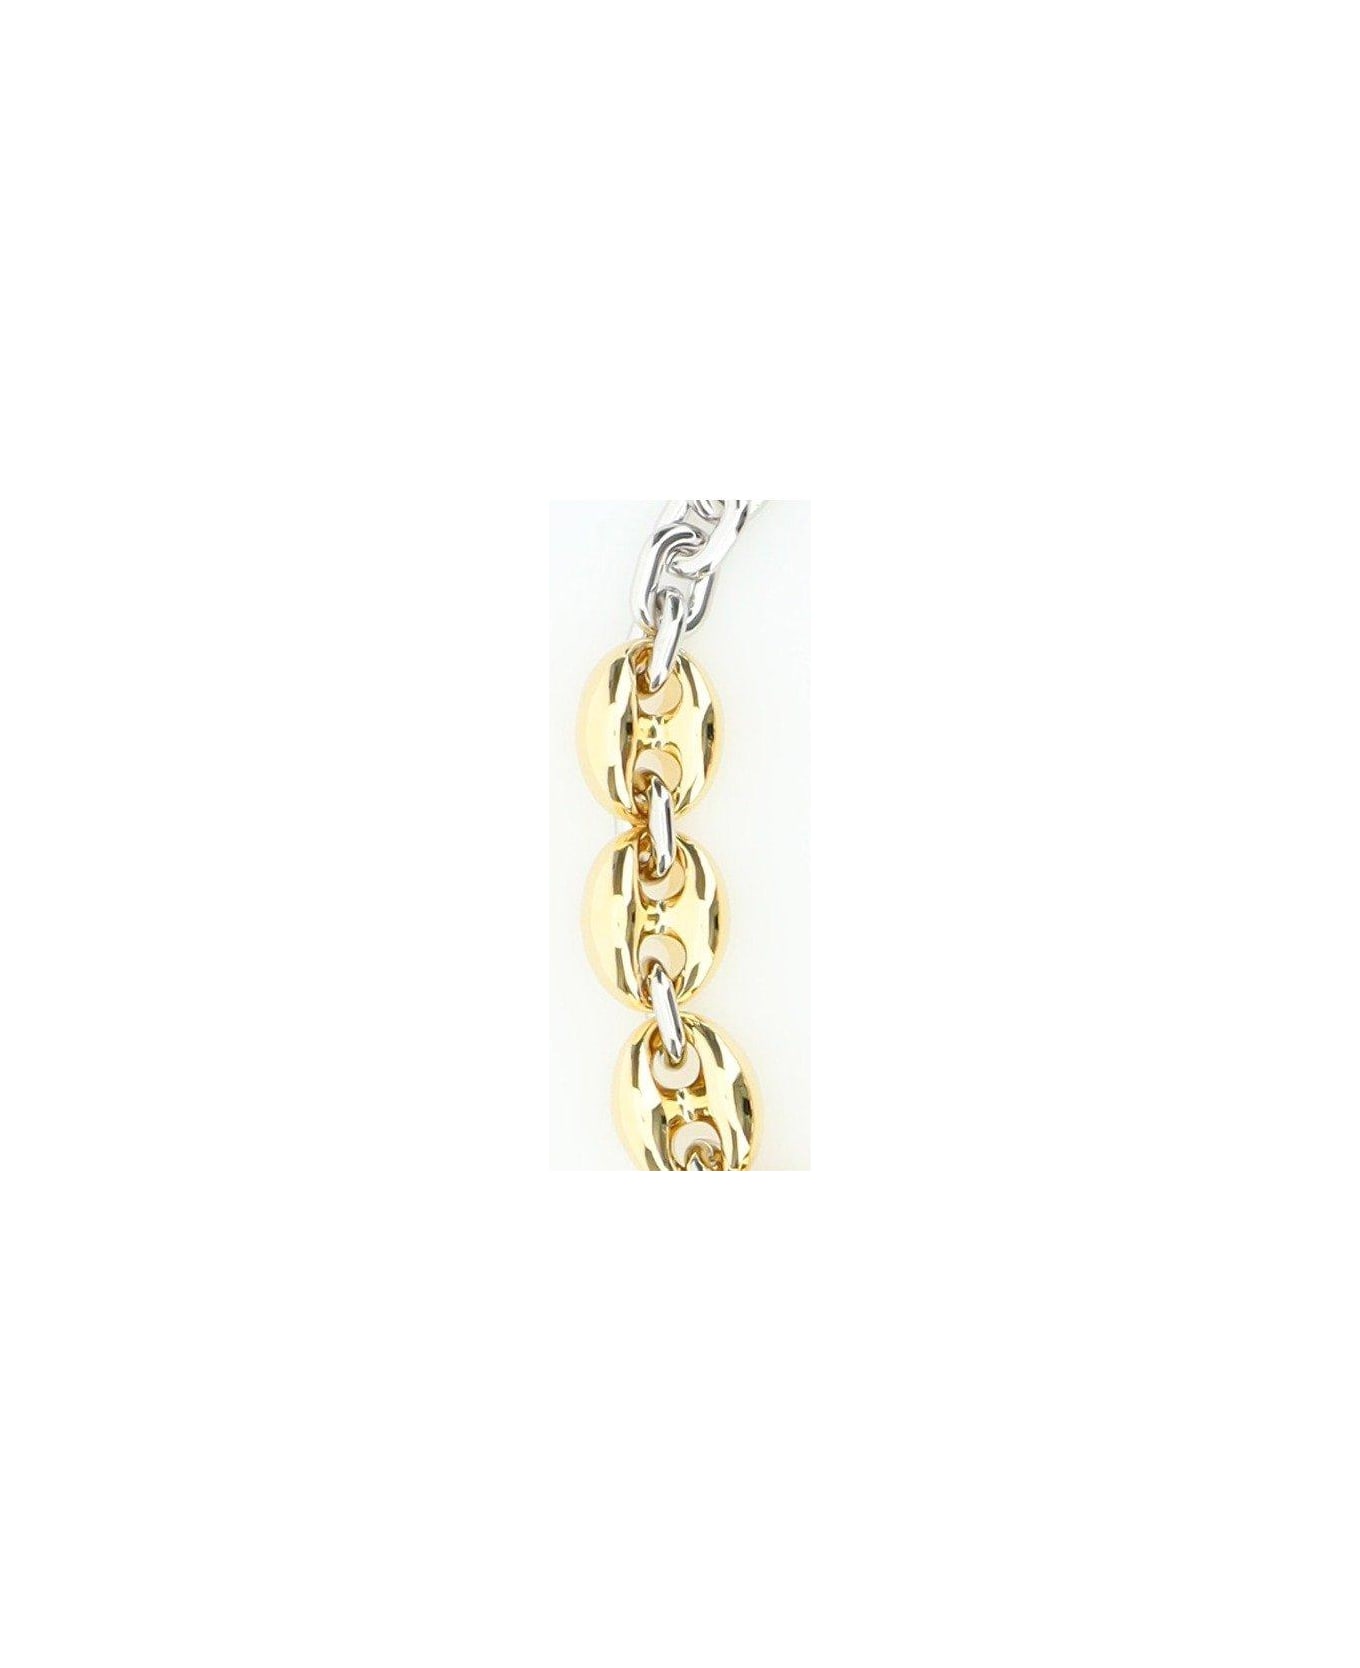 Paco Rabanne 'x Eight' Necklace - Gold Silver ネックレス